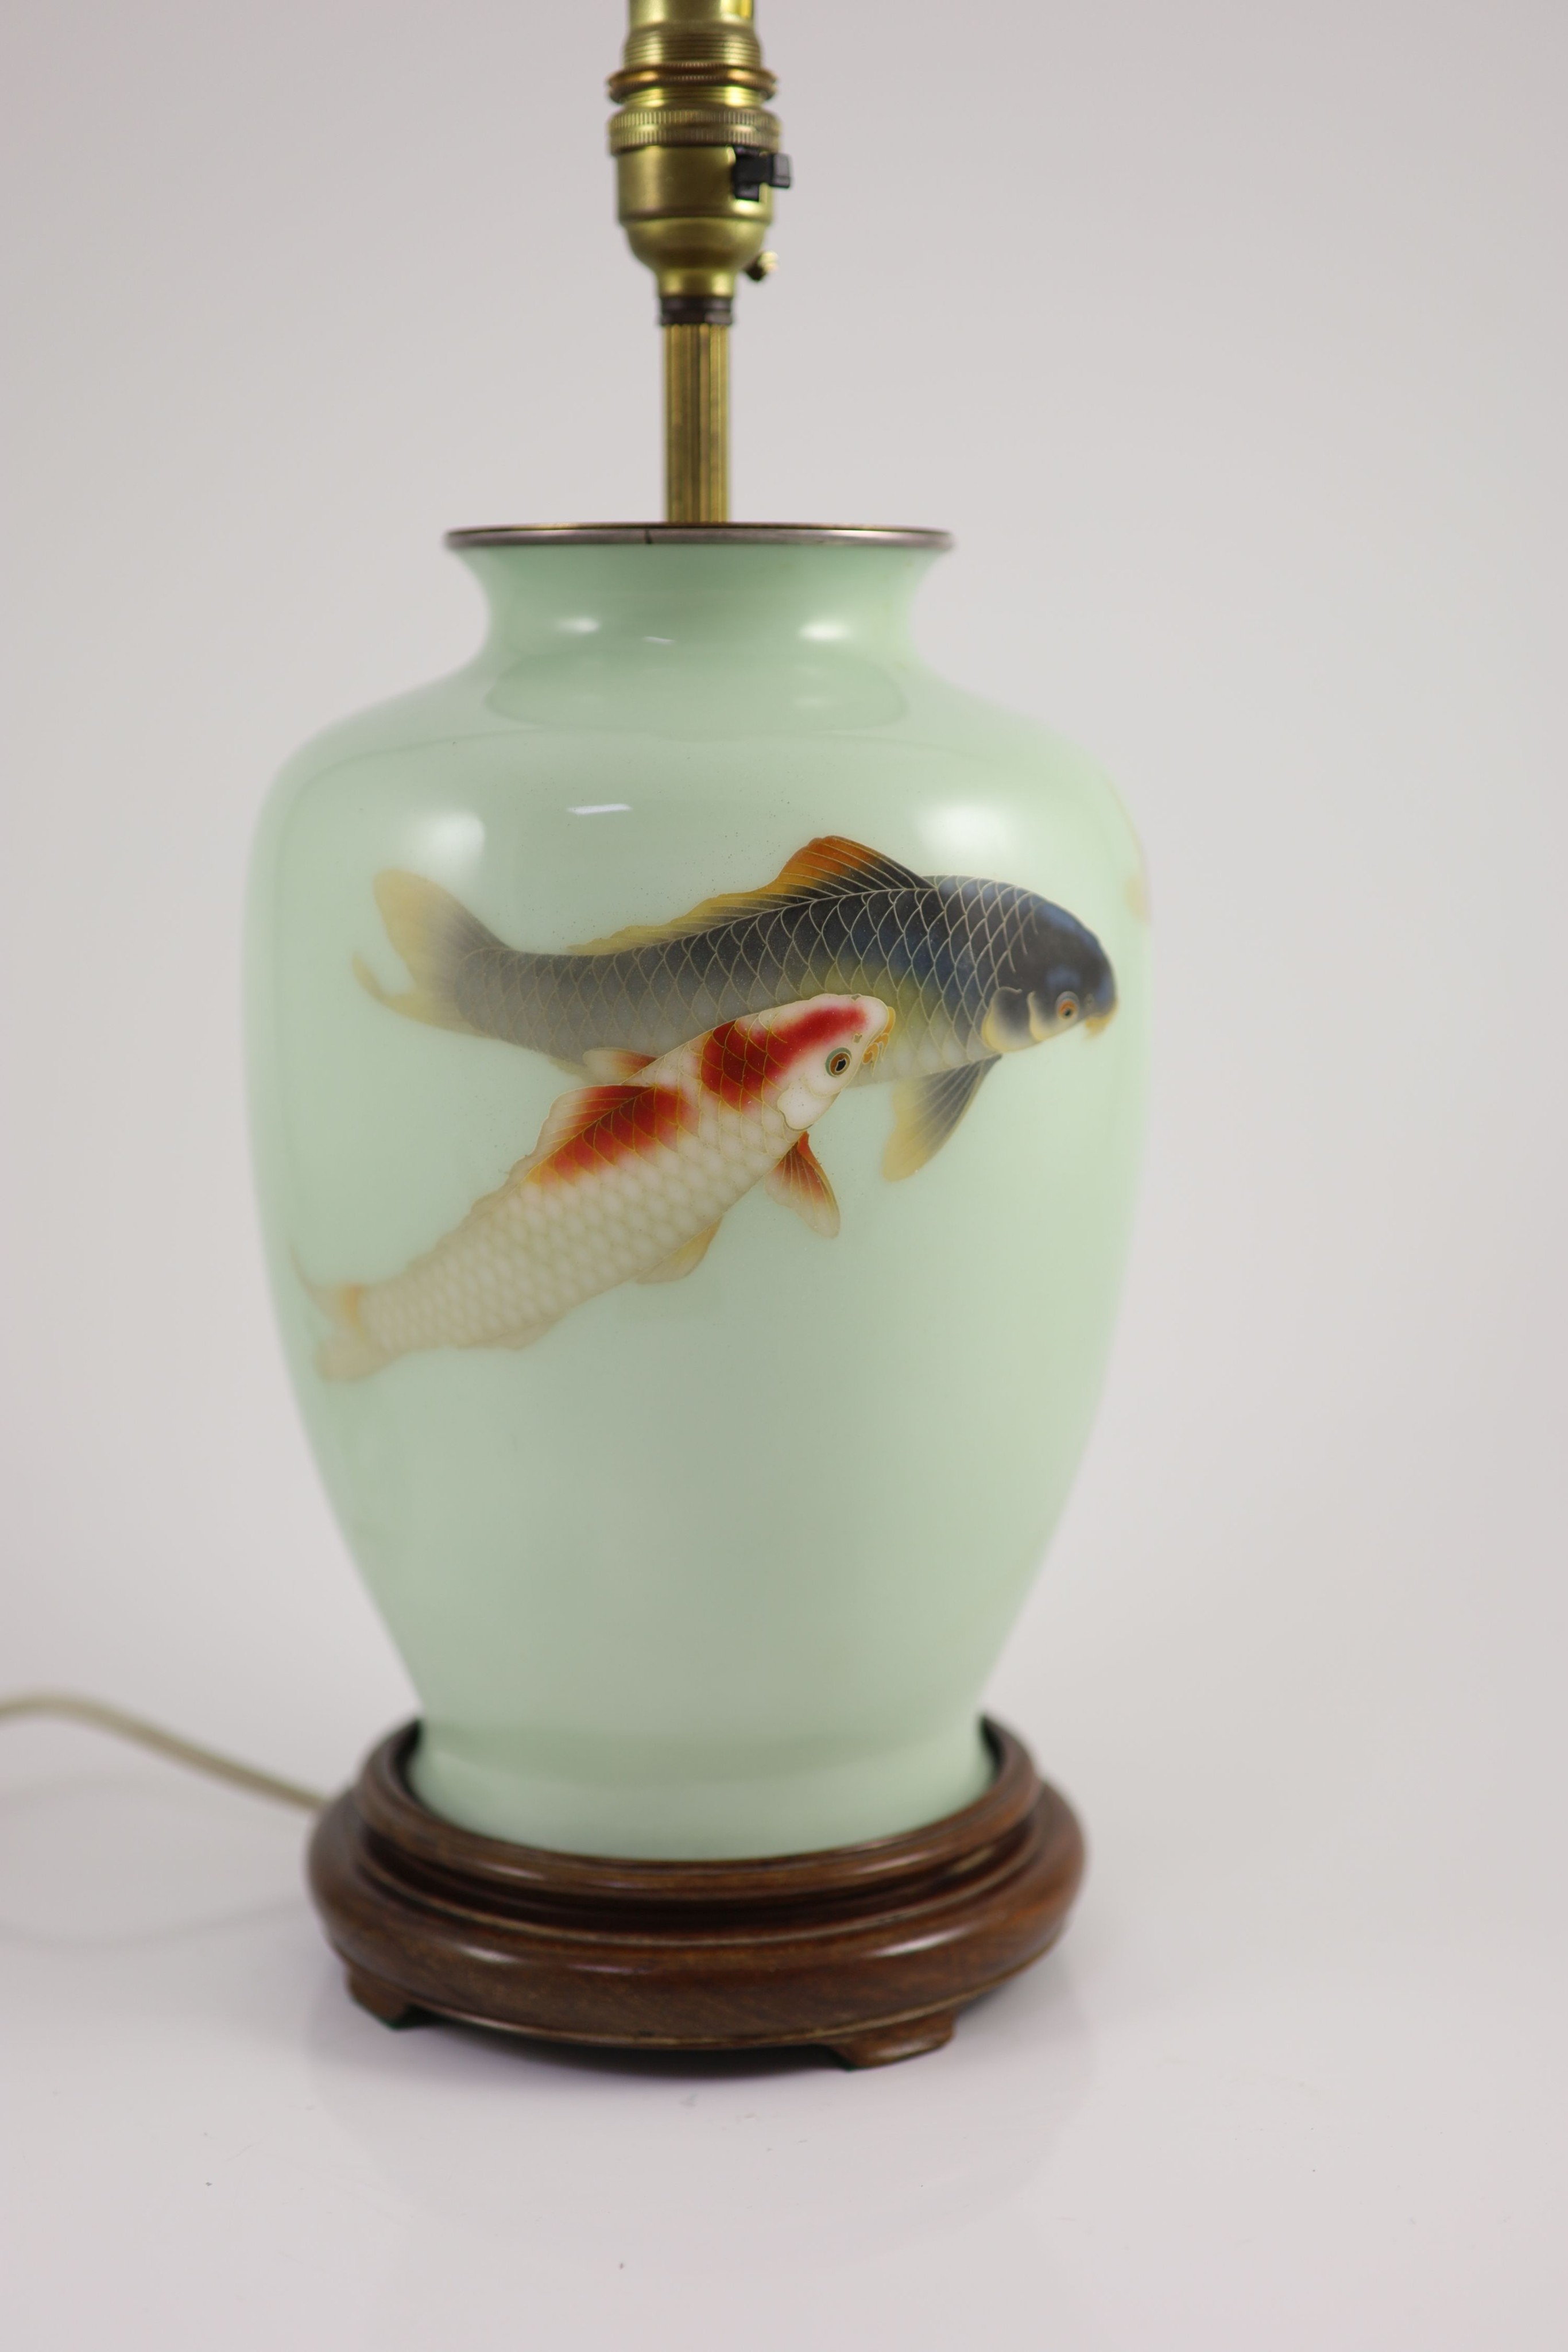 A Japanese cloisonné vase mounted as a lamp, attributed to Ando, mid 20th century 24cm high, base drilled